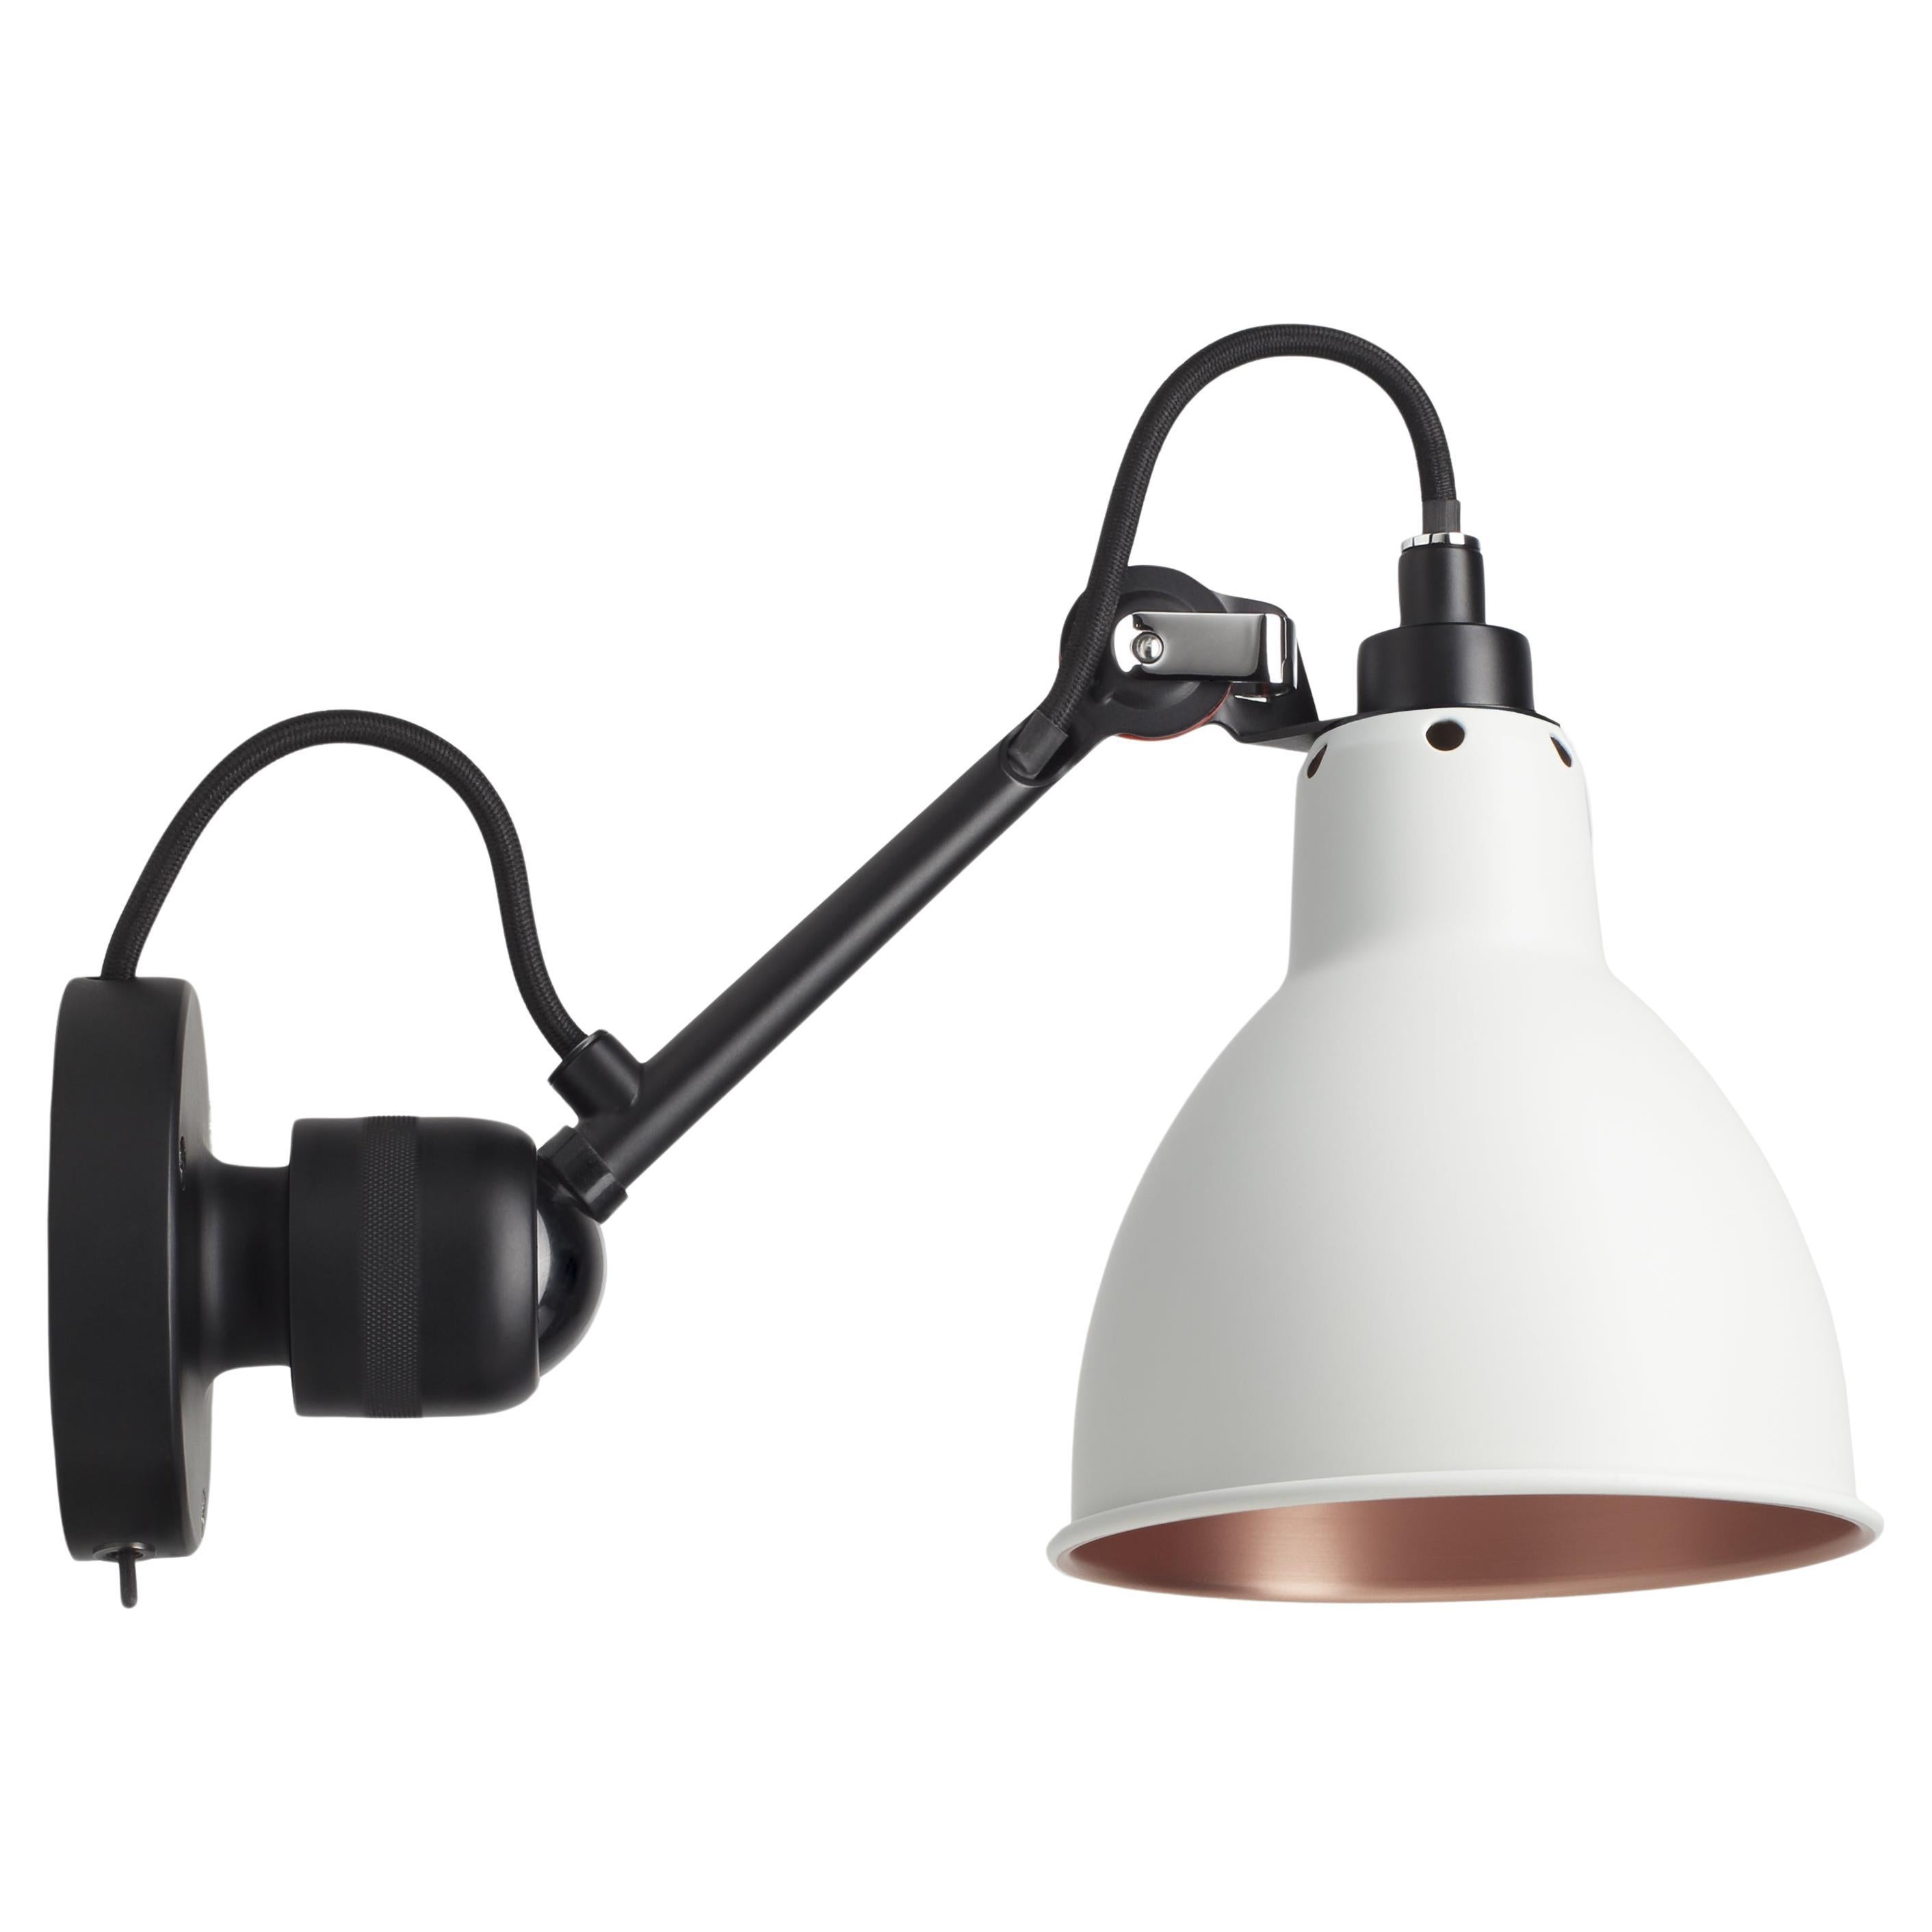 DCW Editions La Lampe Gras N°304 SW Wall Lamp in Black Arm & White Copper Shade For Sale